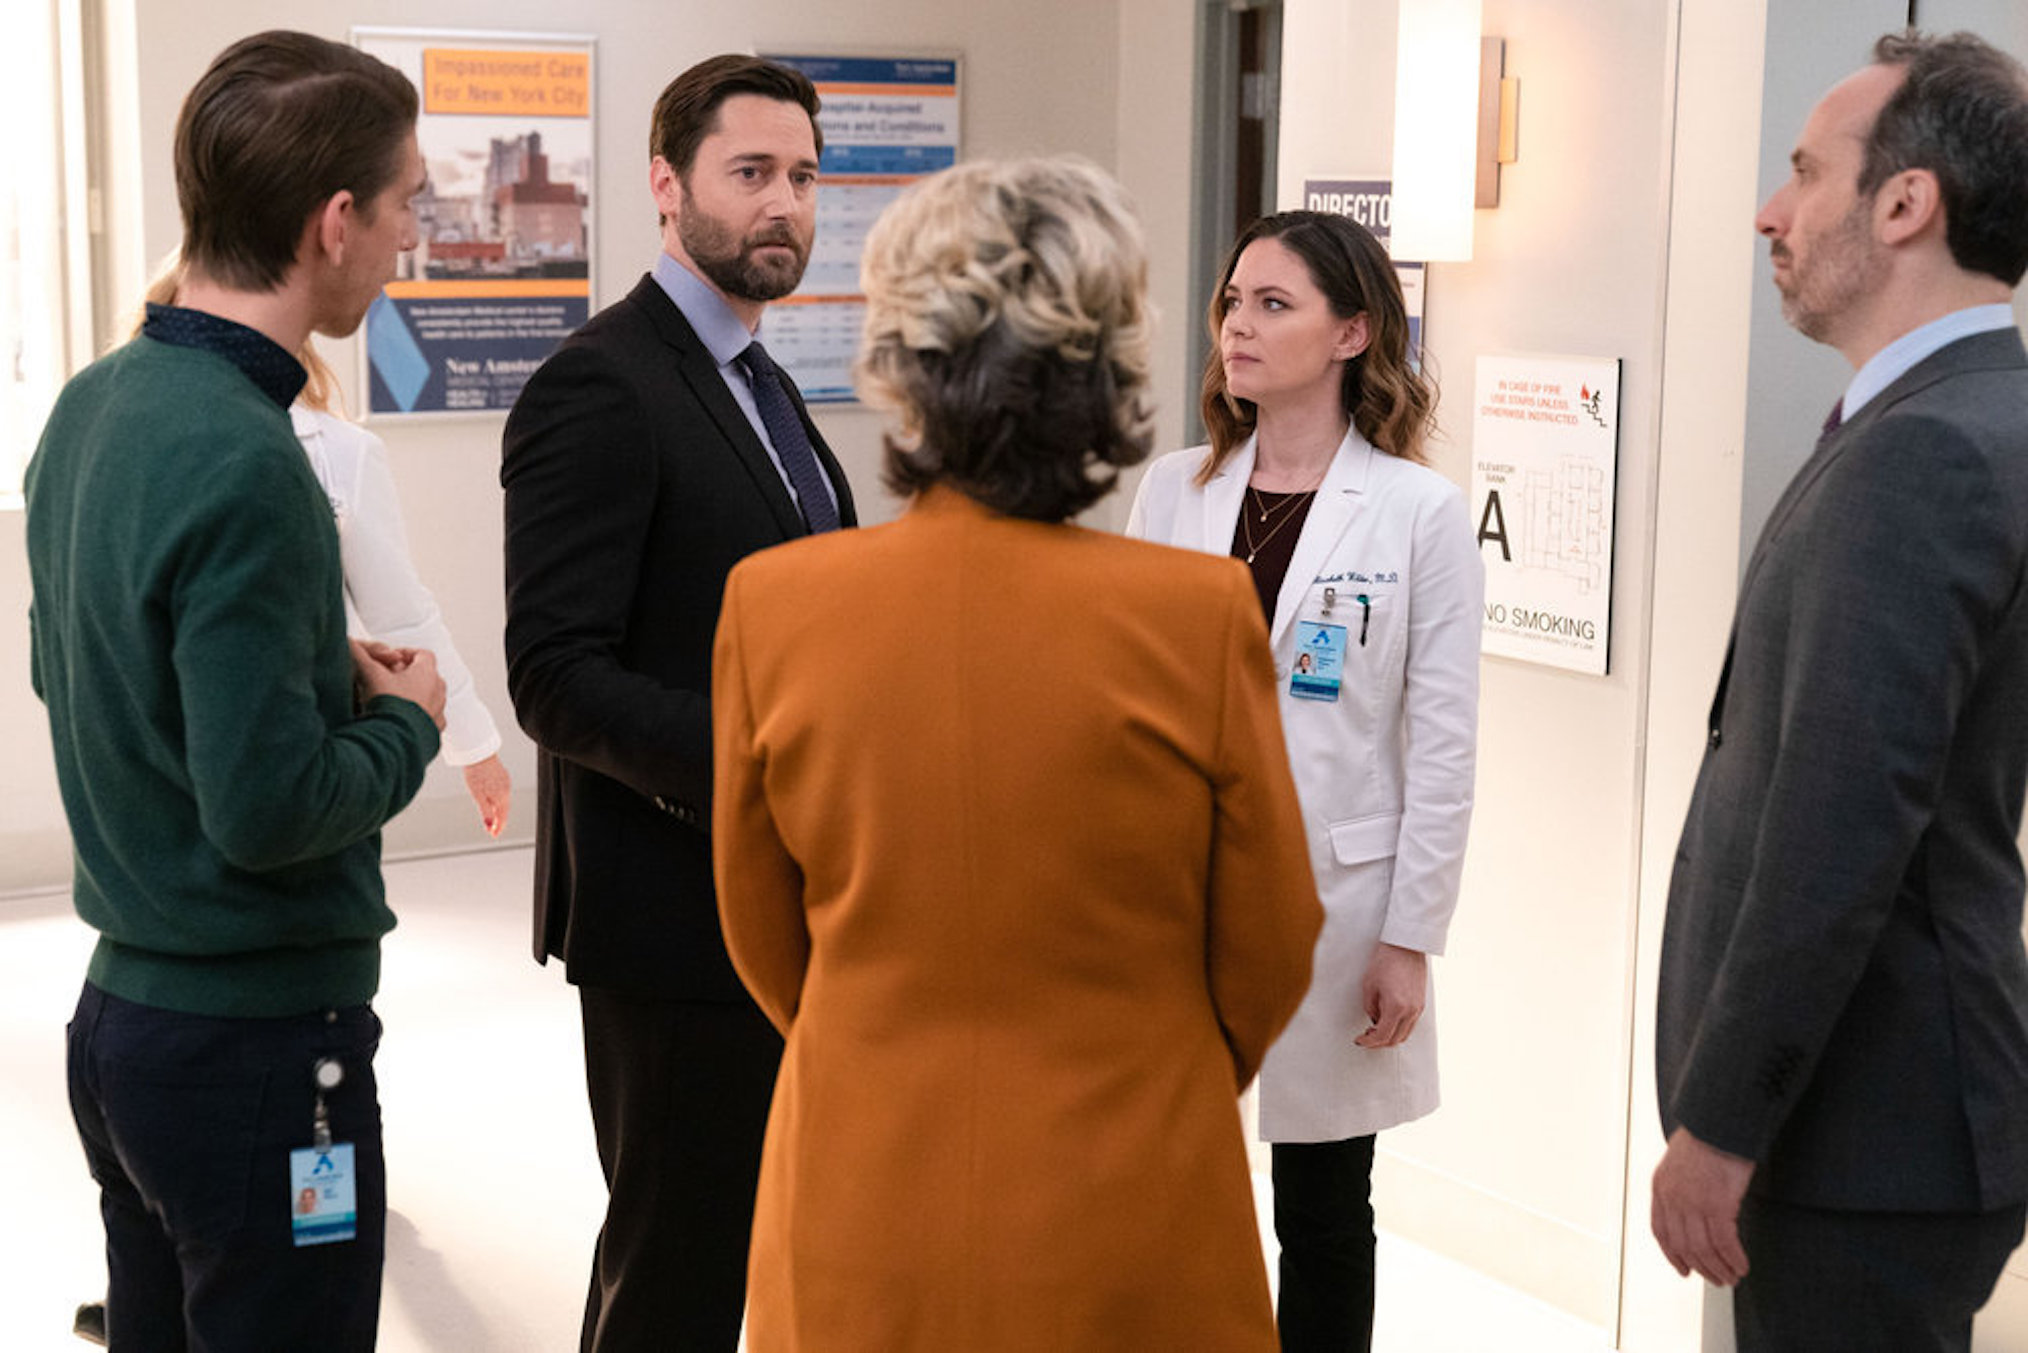 Conner Marx, Ryan Eggold, and Sandra Mae Frank in 'New Amsterdam'